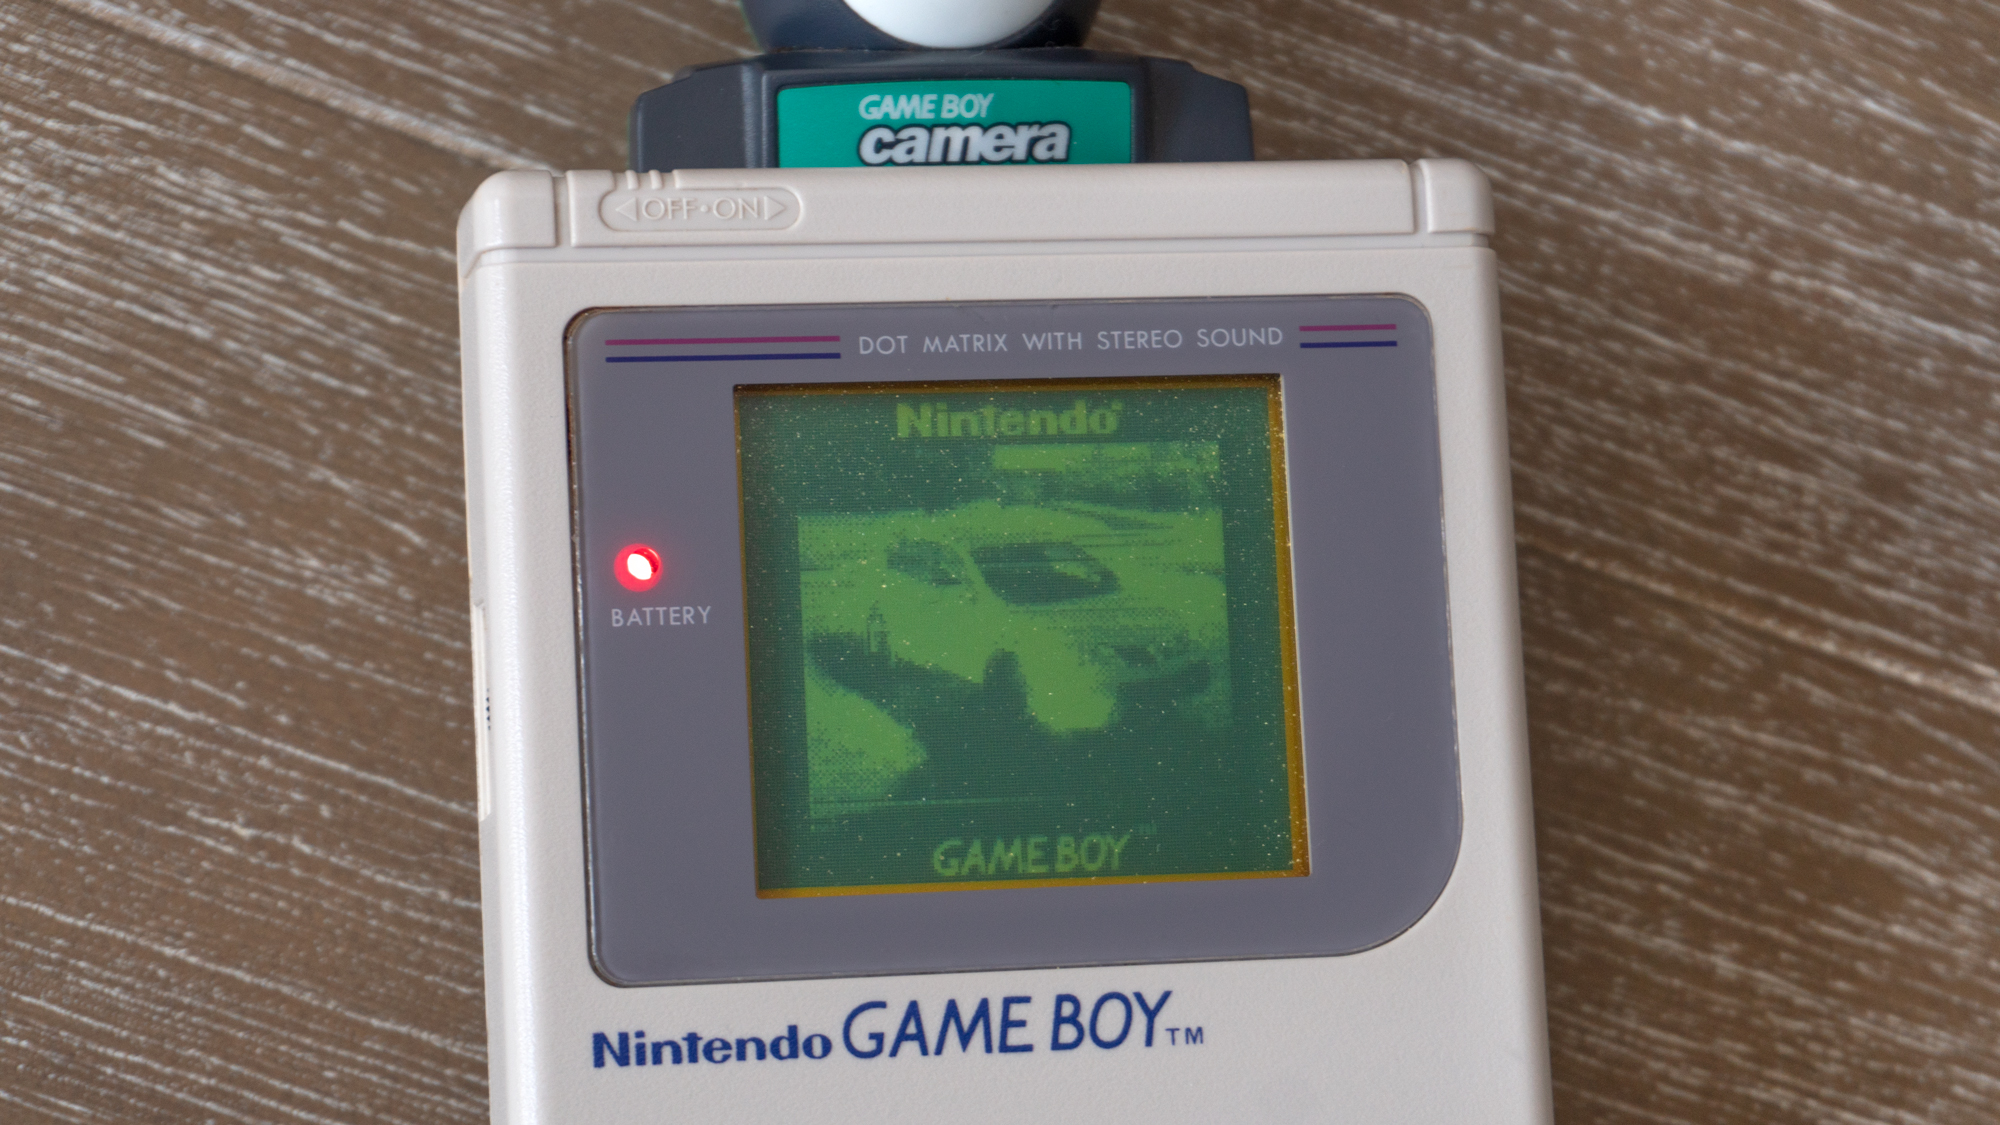 There's no sugar-coating it: the Game Boy Camera took awful photos. But Nintendo managed to make that a big part of its appeal, not its downfall. (Photo: Andrew Liszewski - Gizmodo)